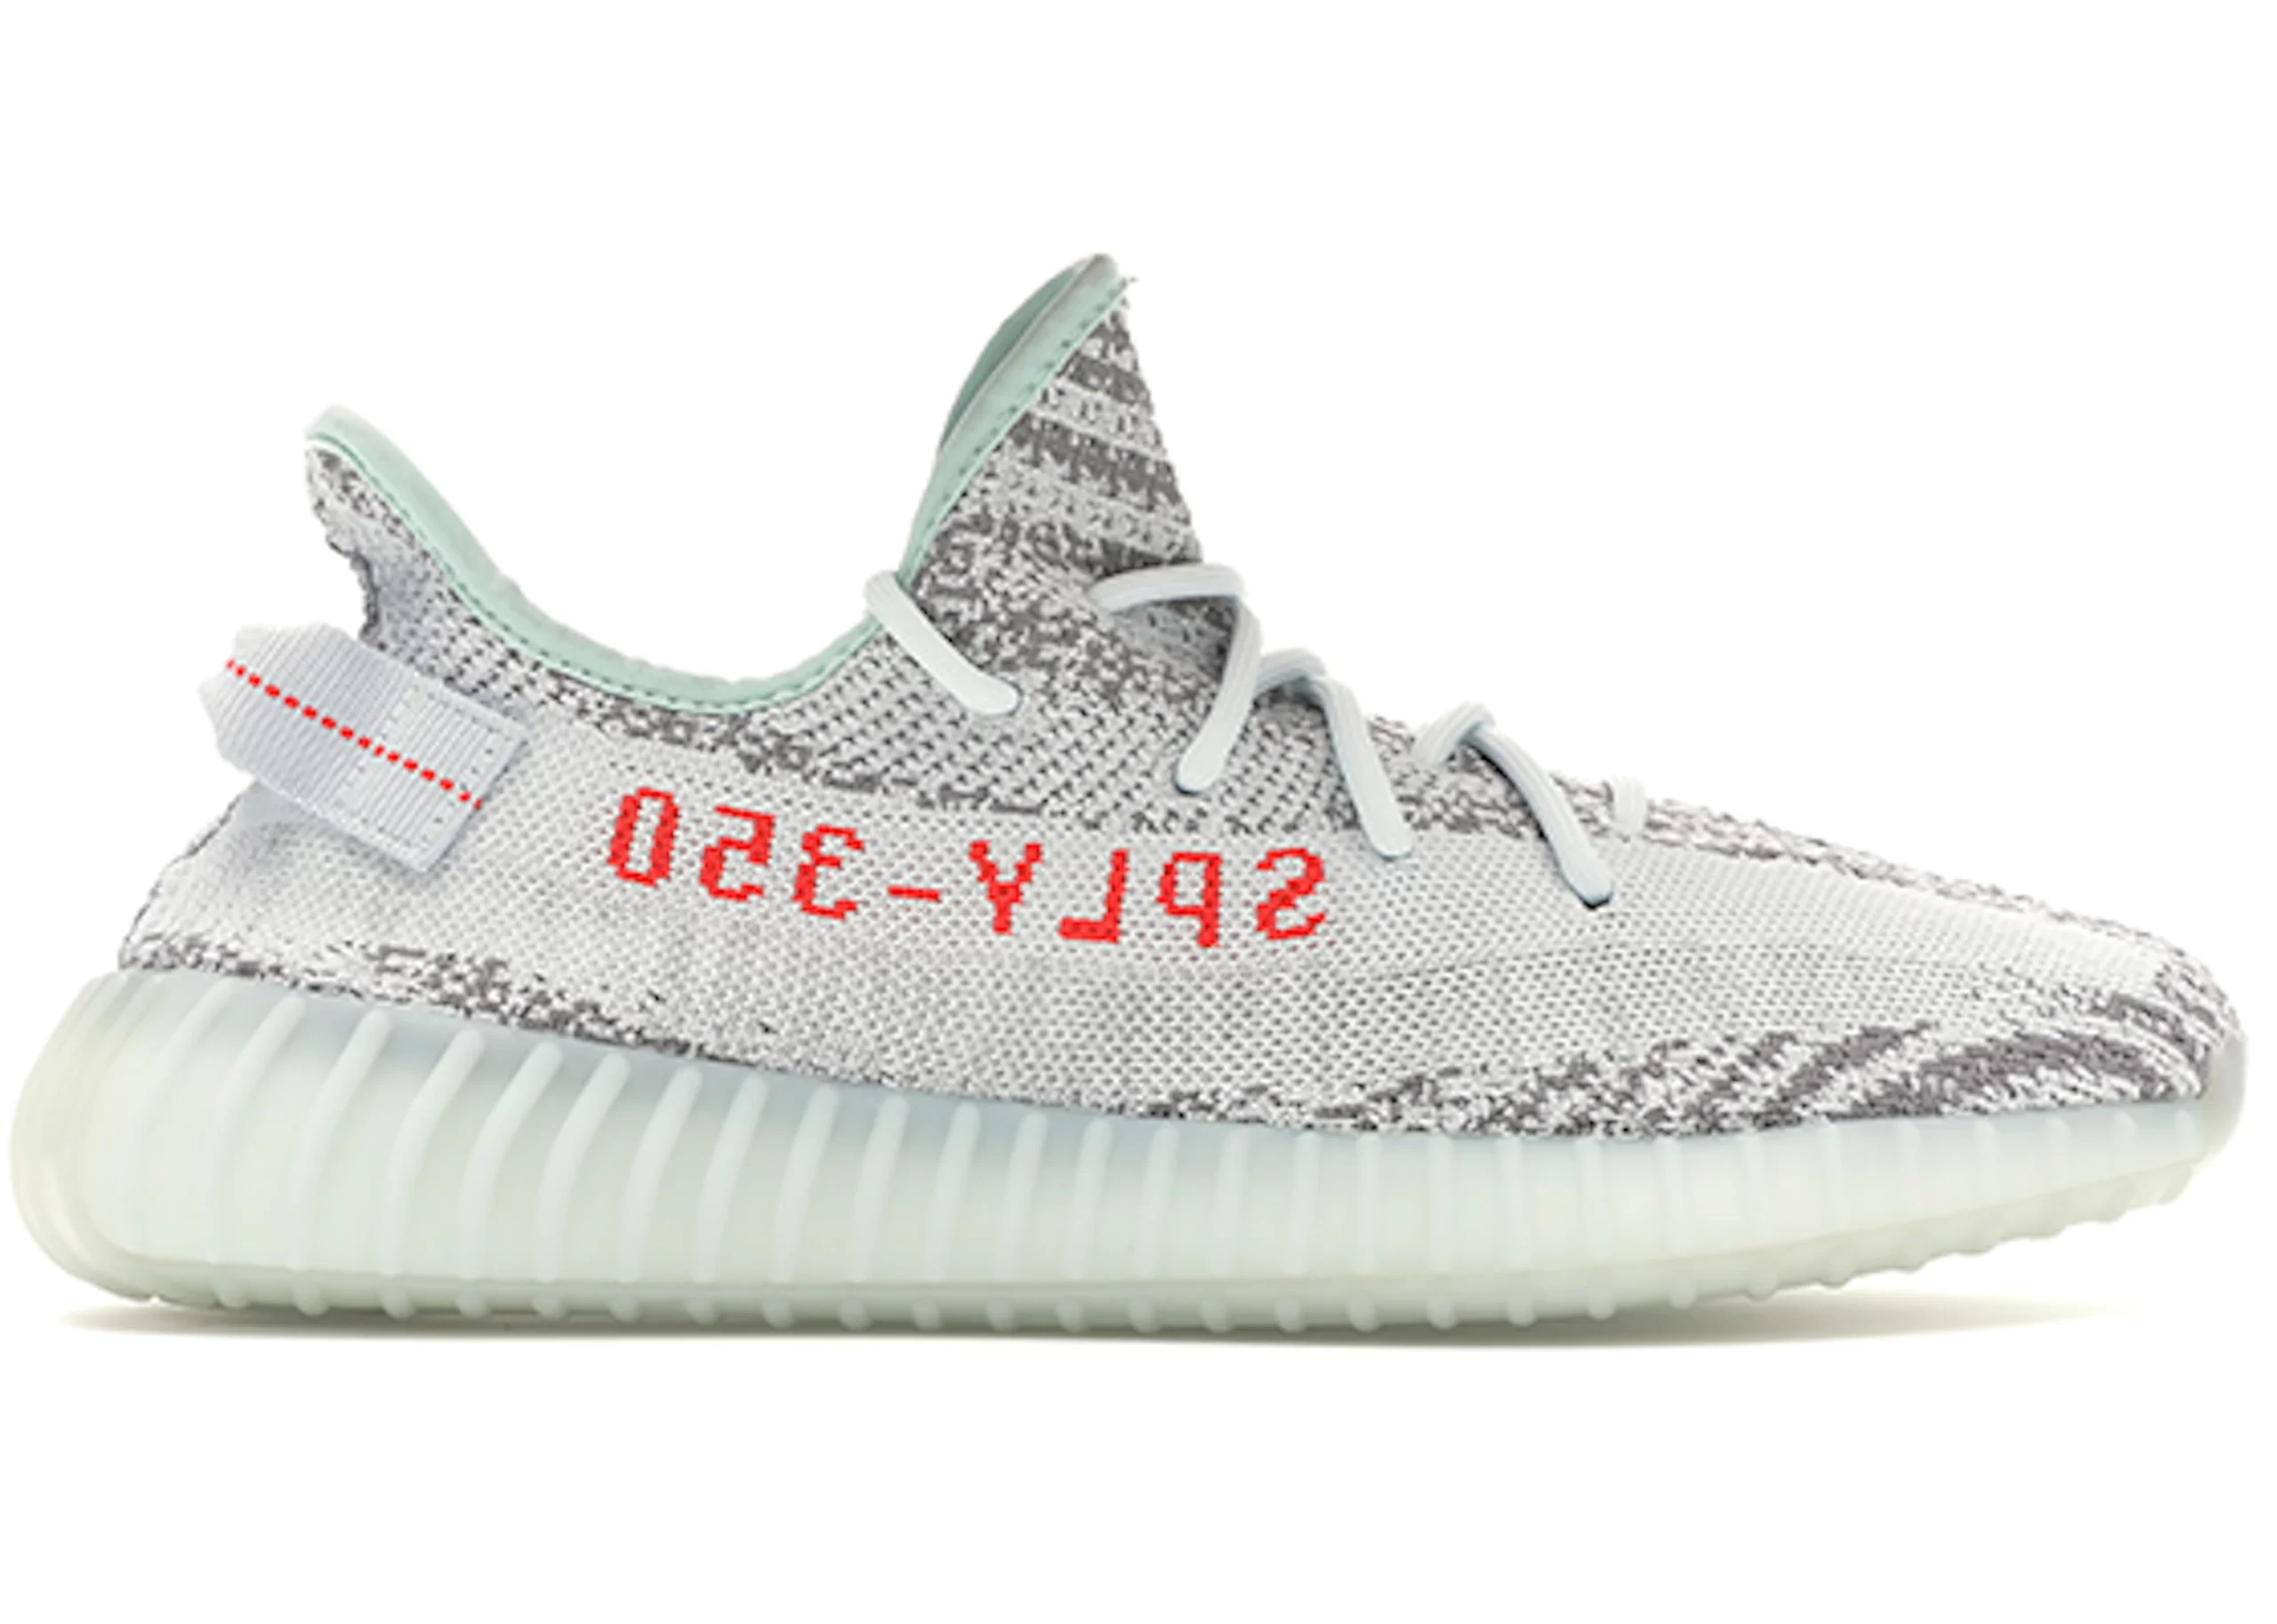 Adidas Yeezy Boost 350 V2 Cloud White (non-reflective)